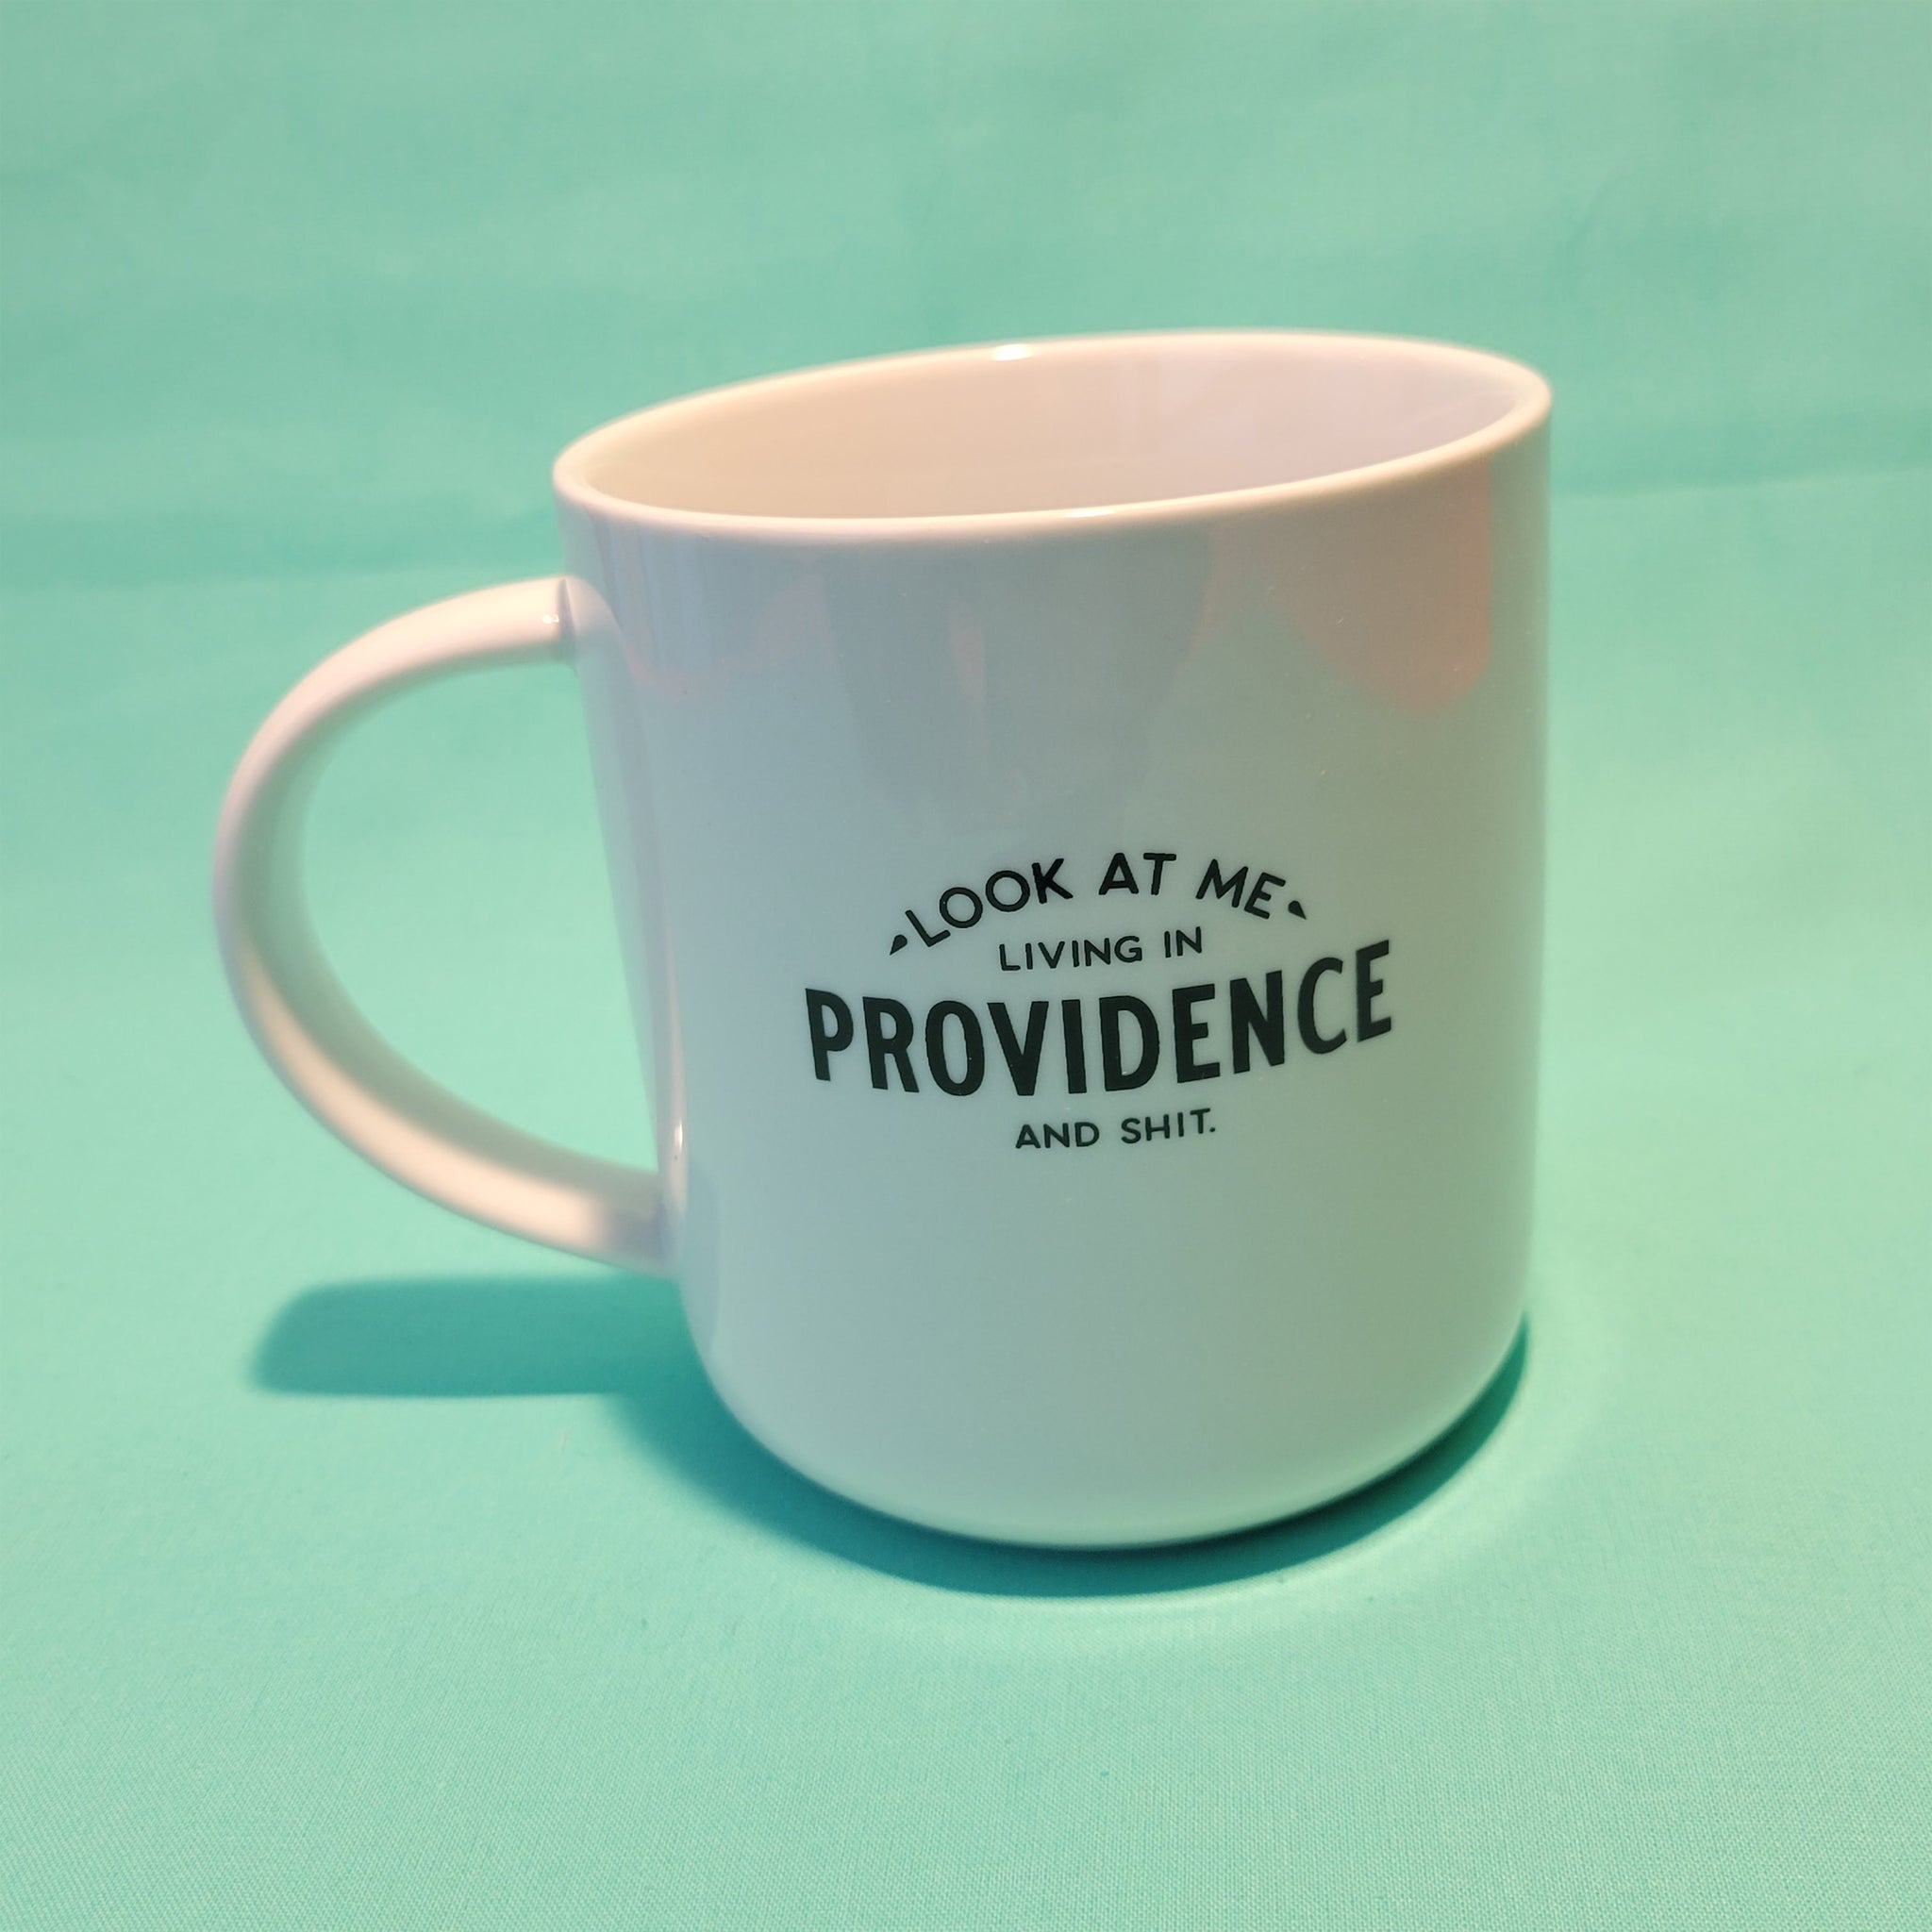 Look at Me Living in Providence Mug!